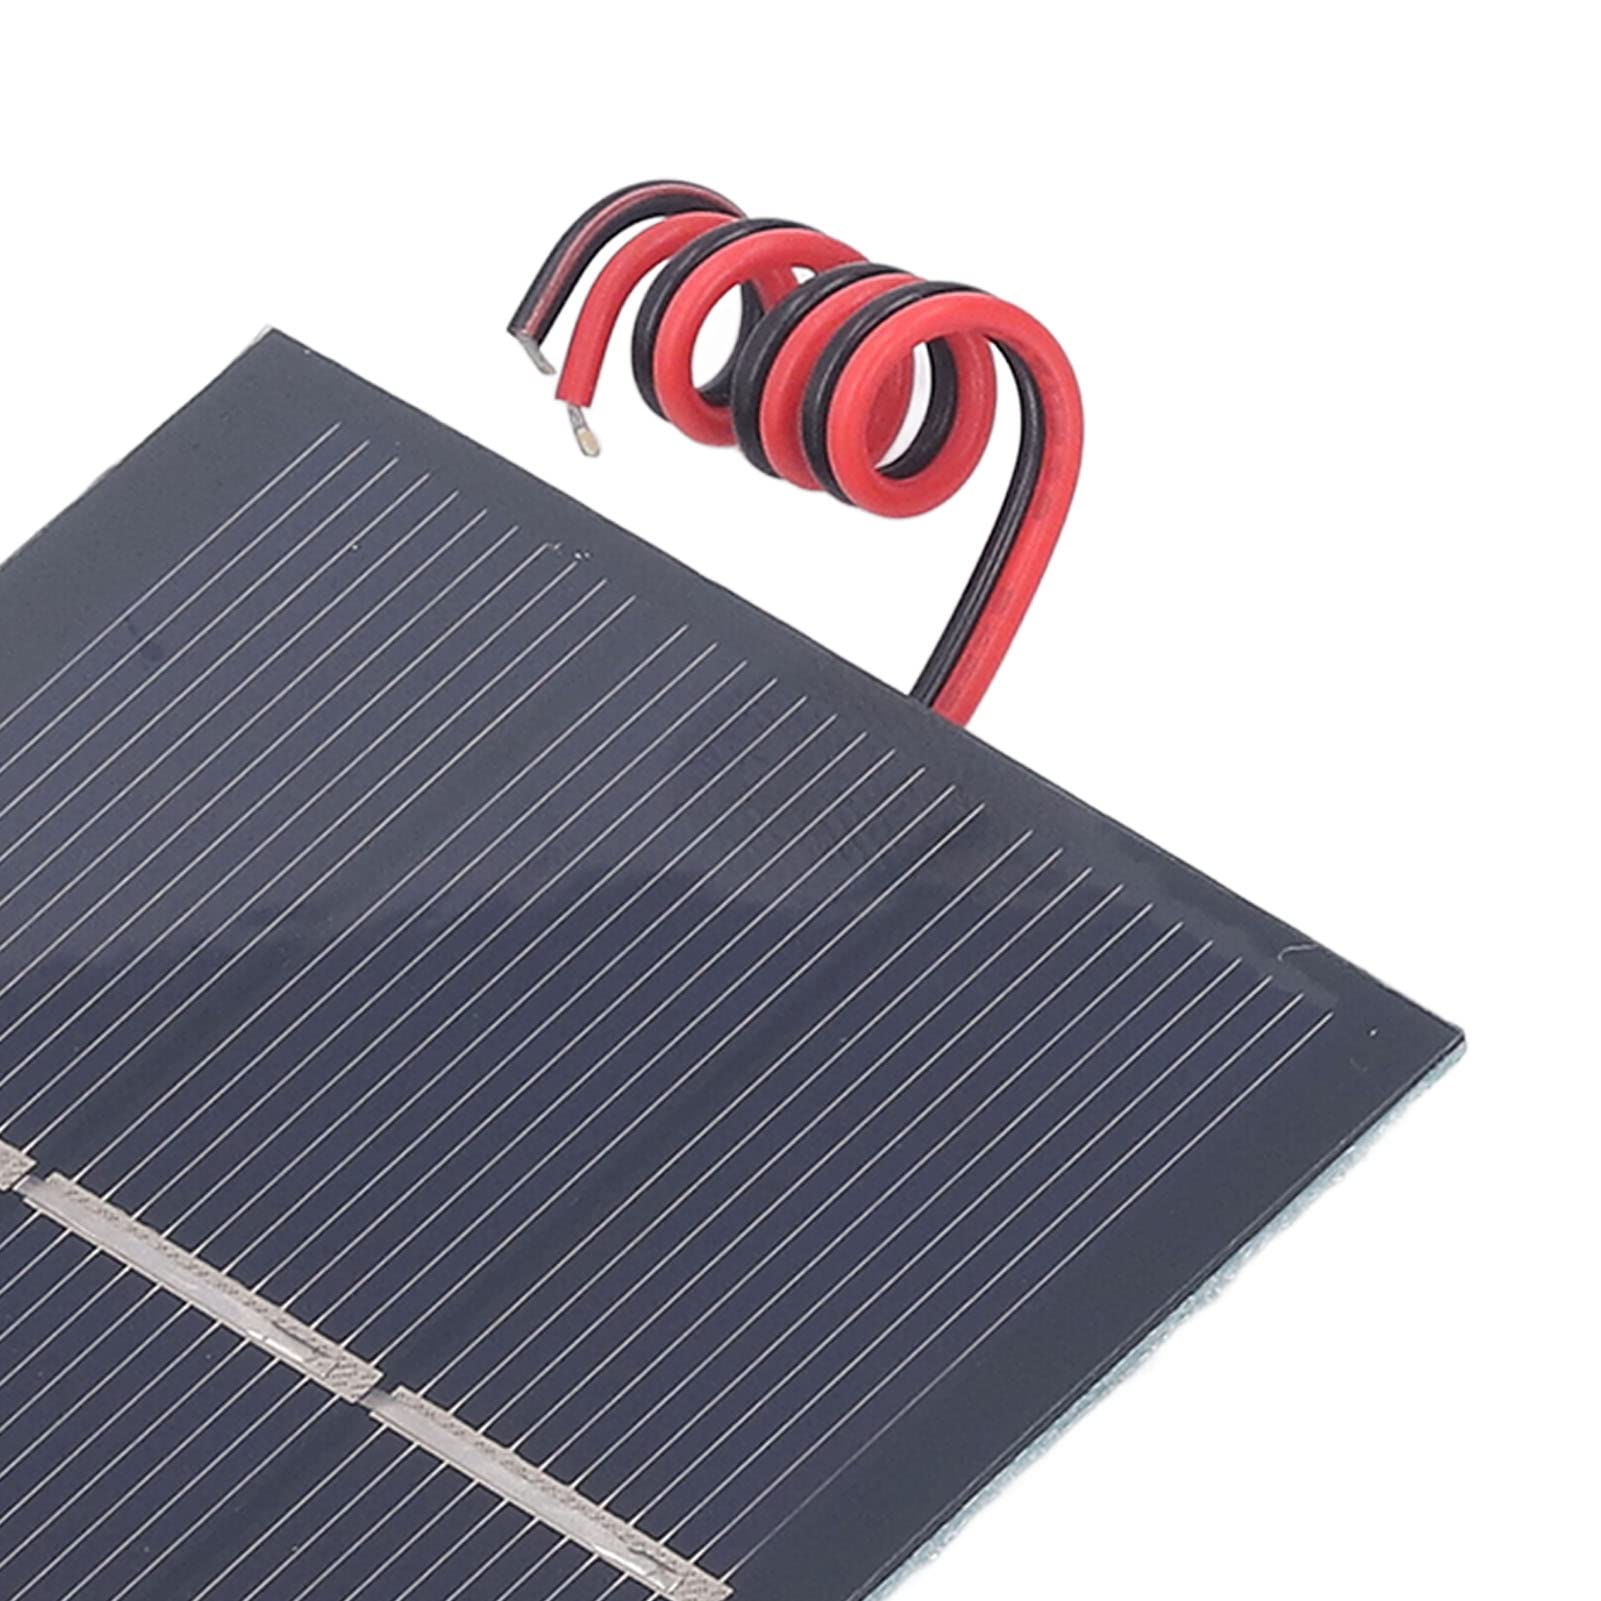 Mini Solar Panel 0.65W 1.5V DIY Plate Solar Panel Charger Kit with Wire for Portable Power Supply